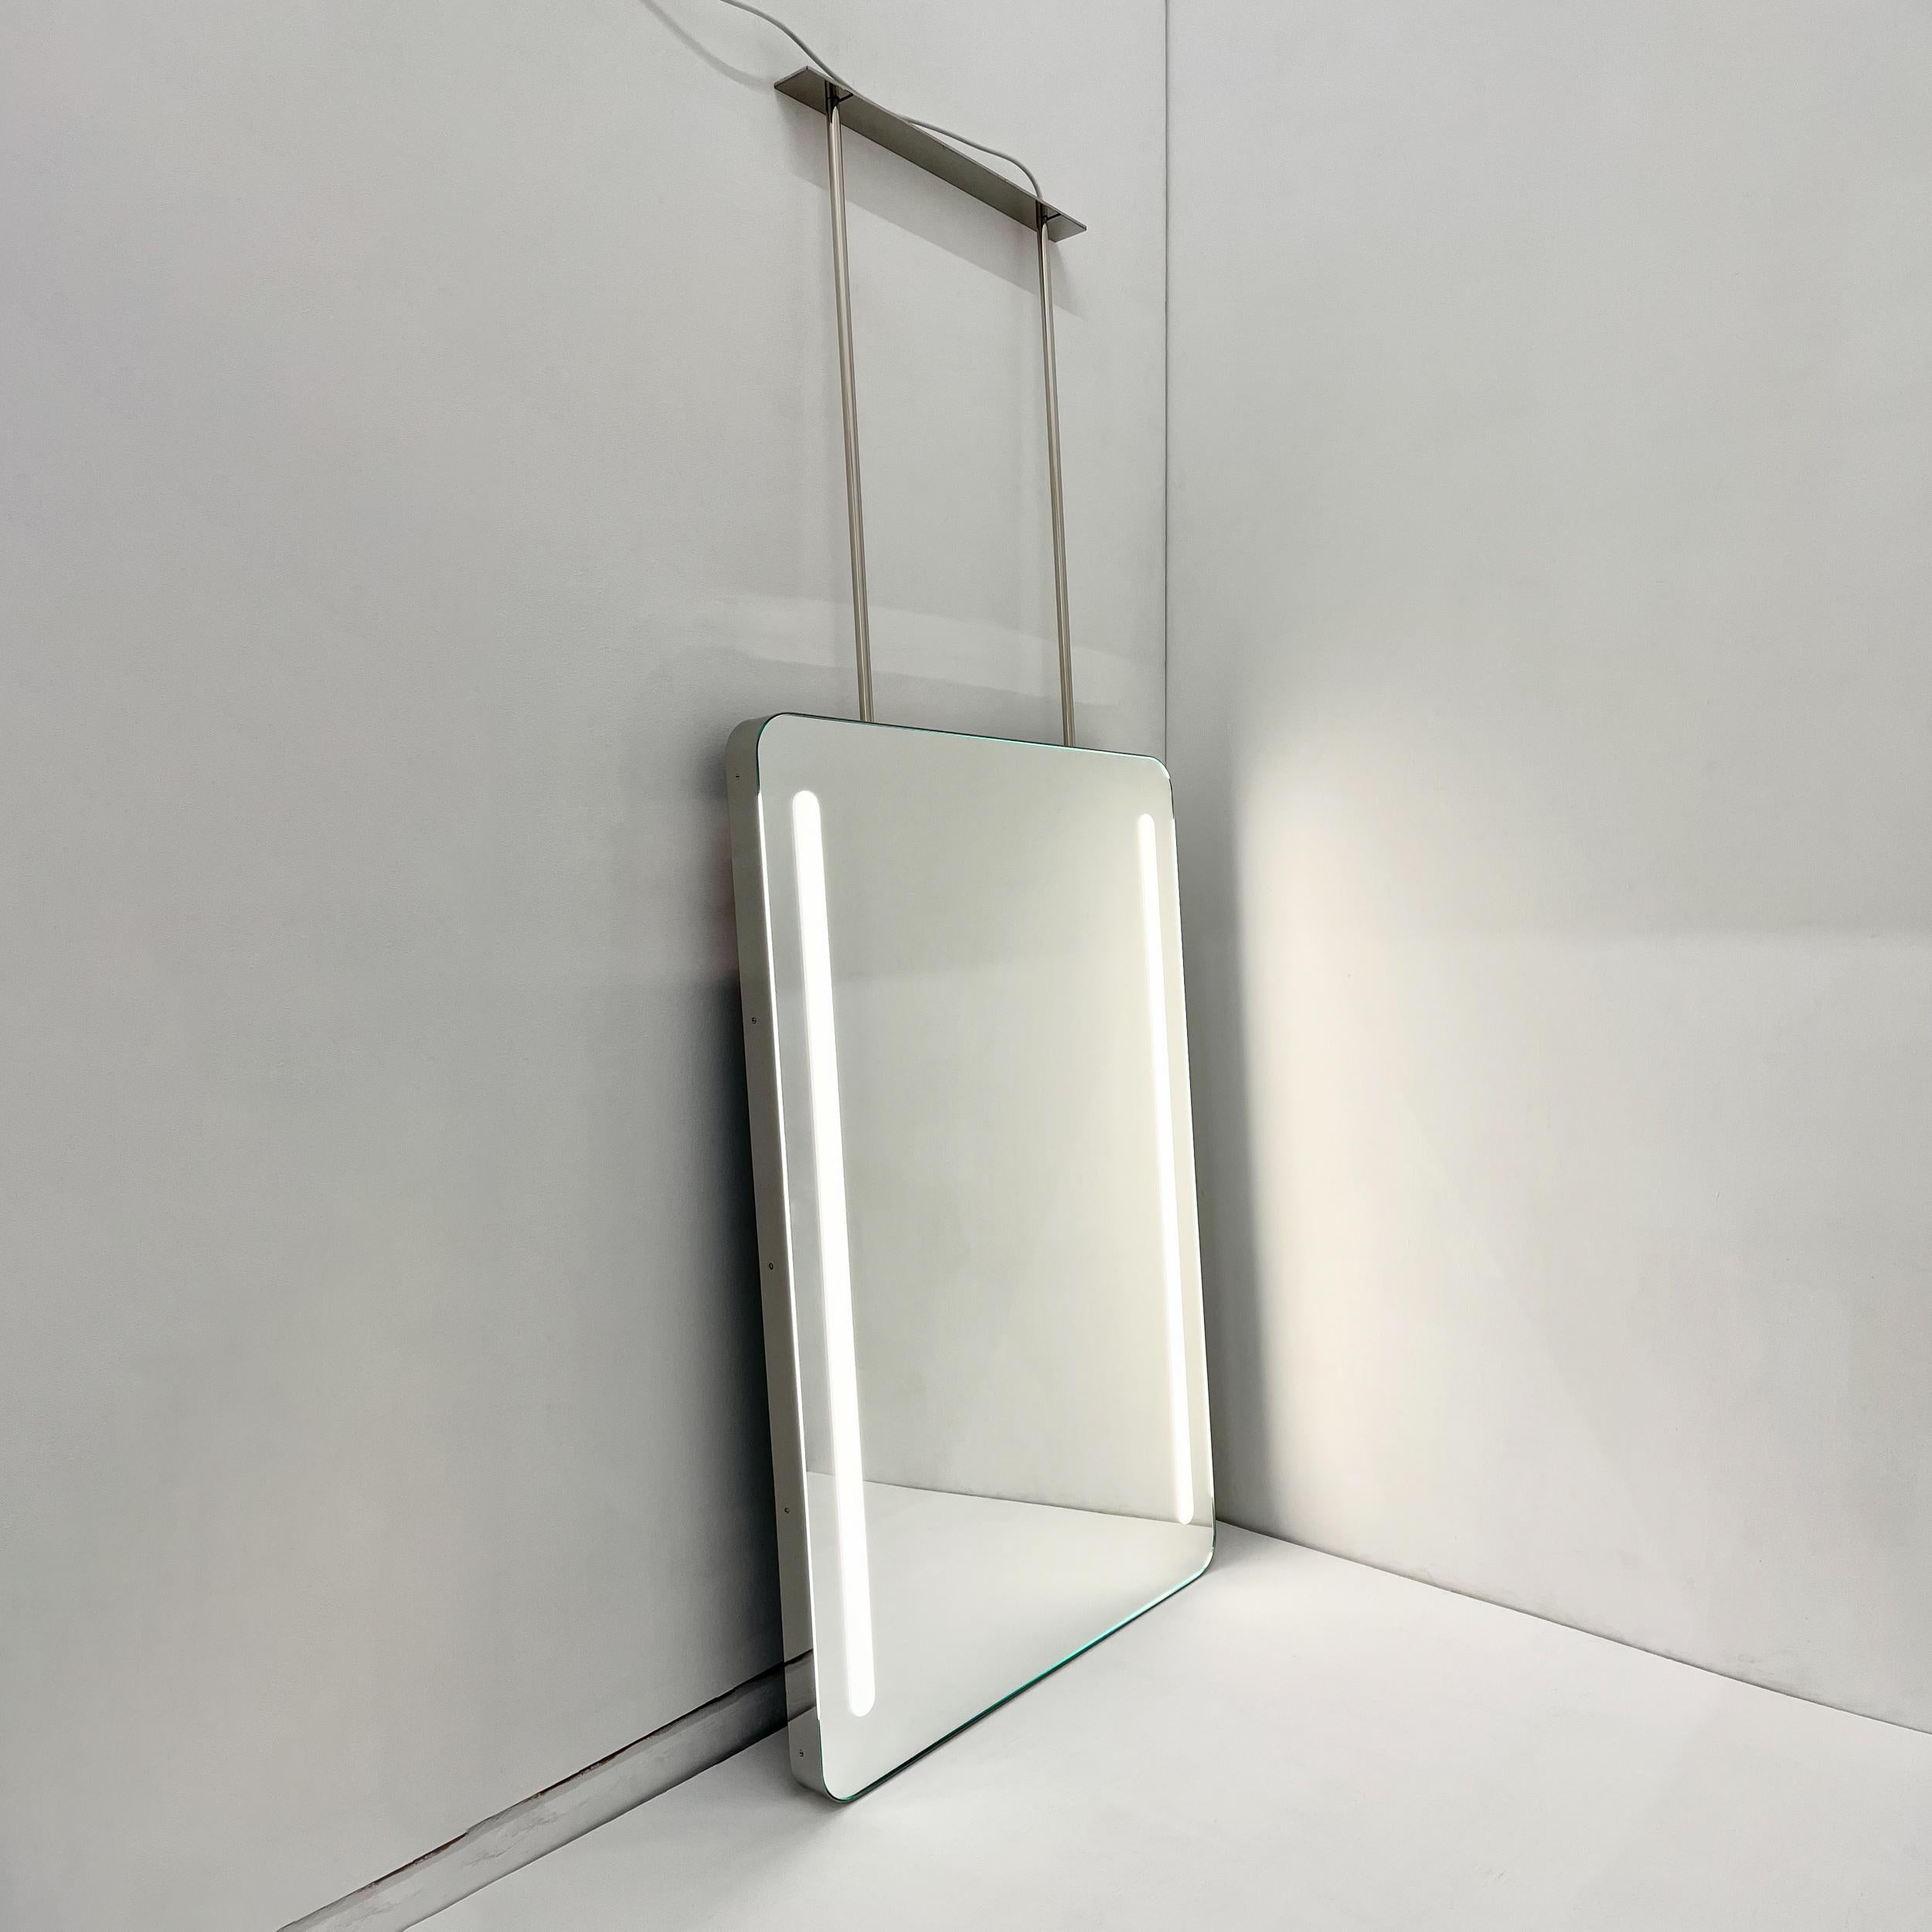 Beautiful modern rectangular mirror with a polished Stainless Steel frame and front illumination.  This piece is part of our original and fully customisable collection of Ceiling Suspended mirrors, designed and handcrafted in London, UK. The